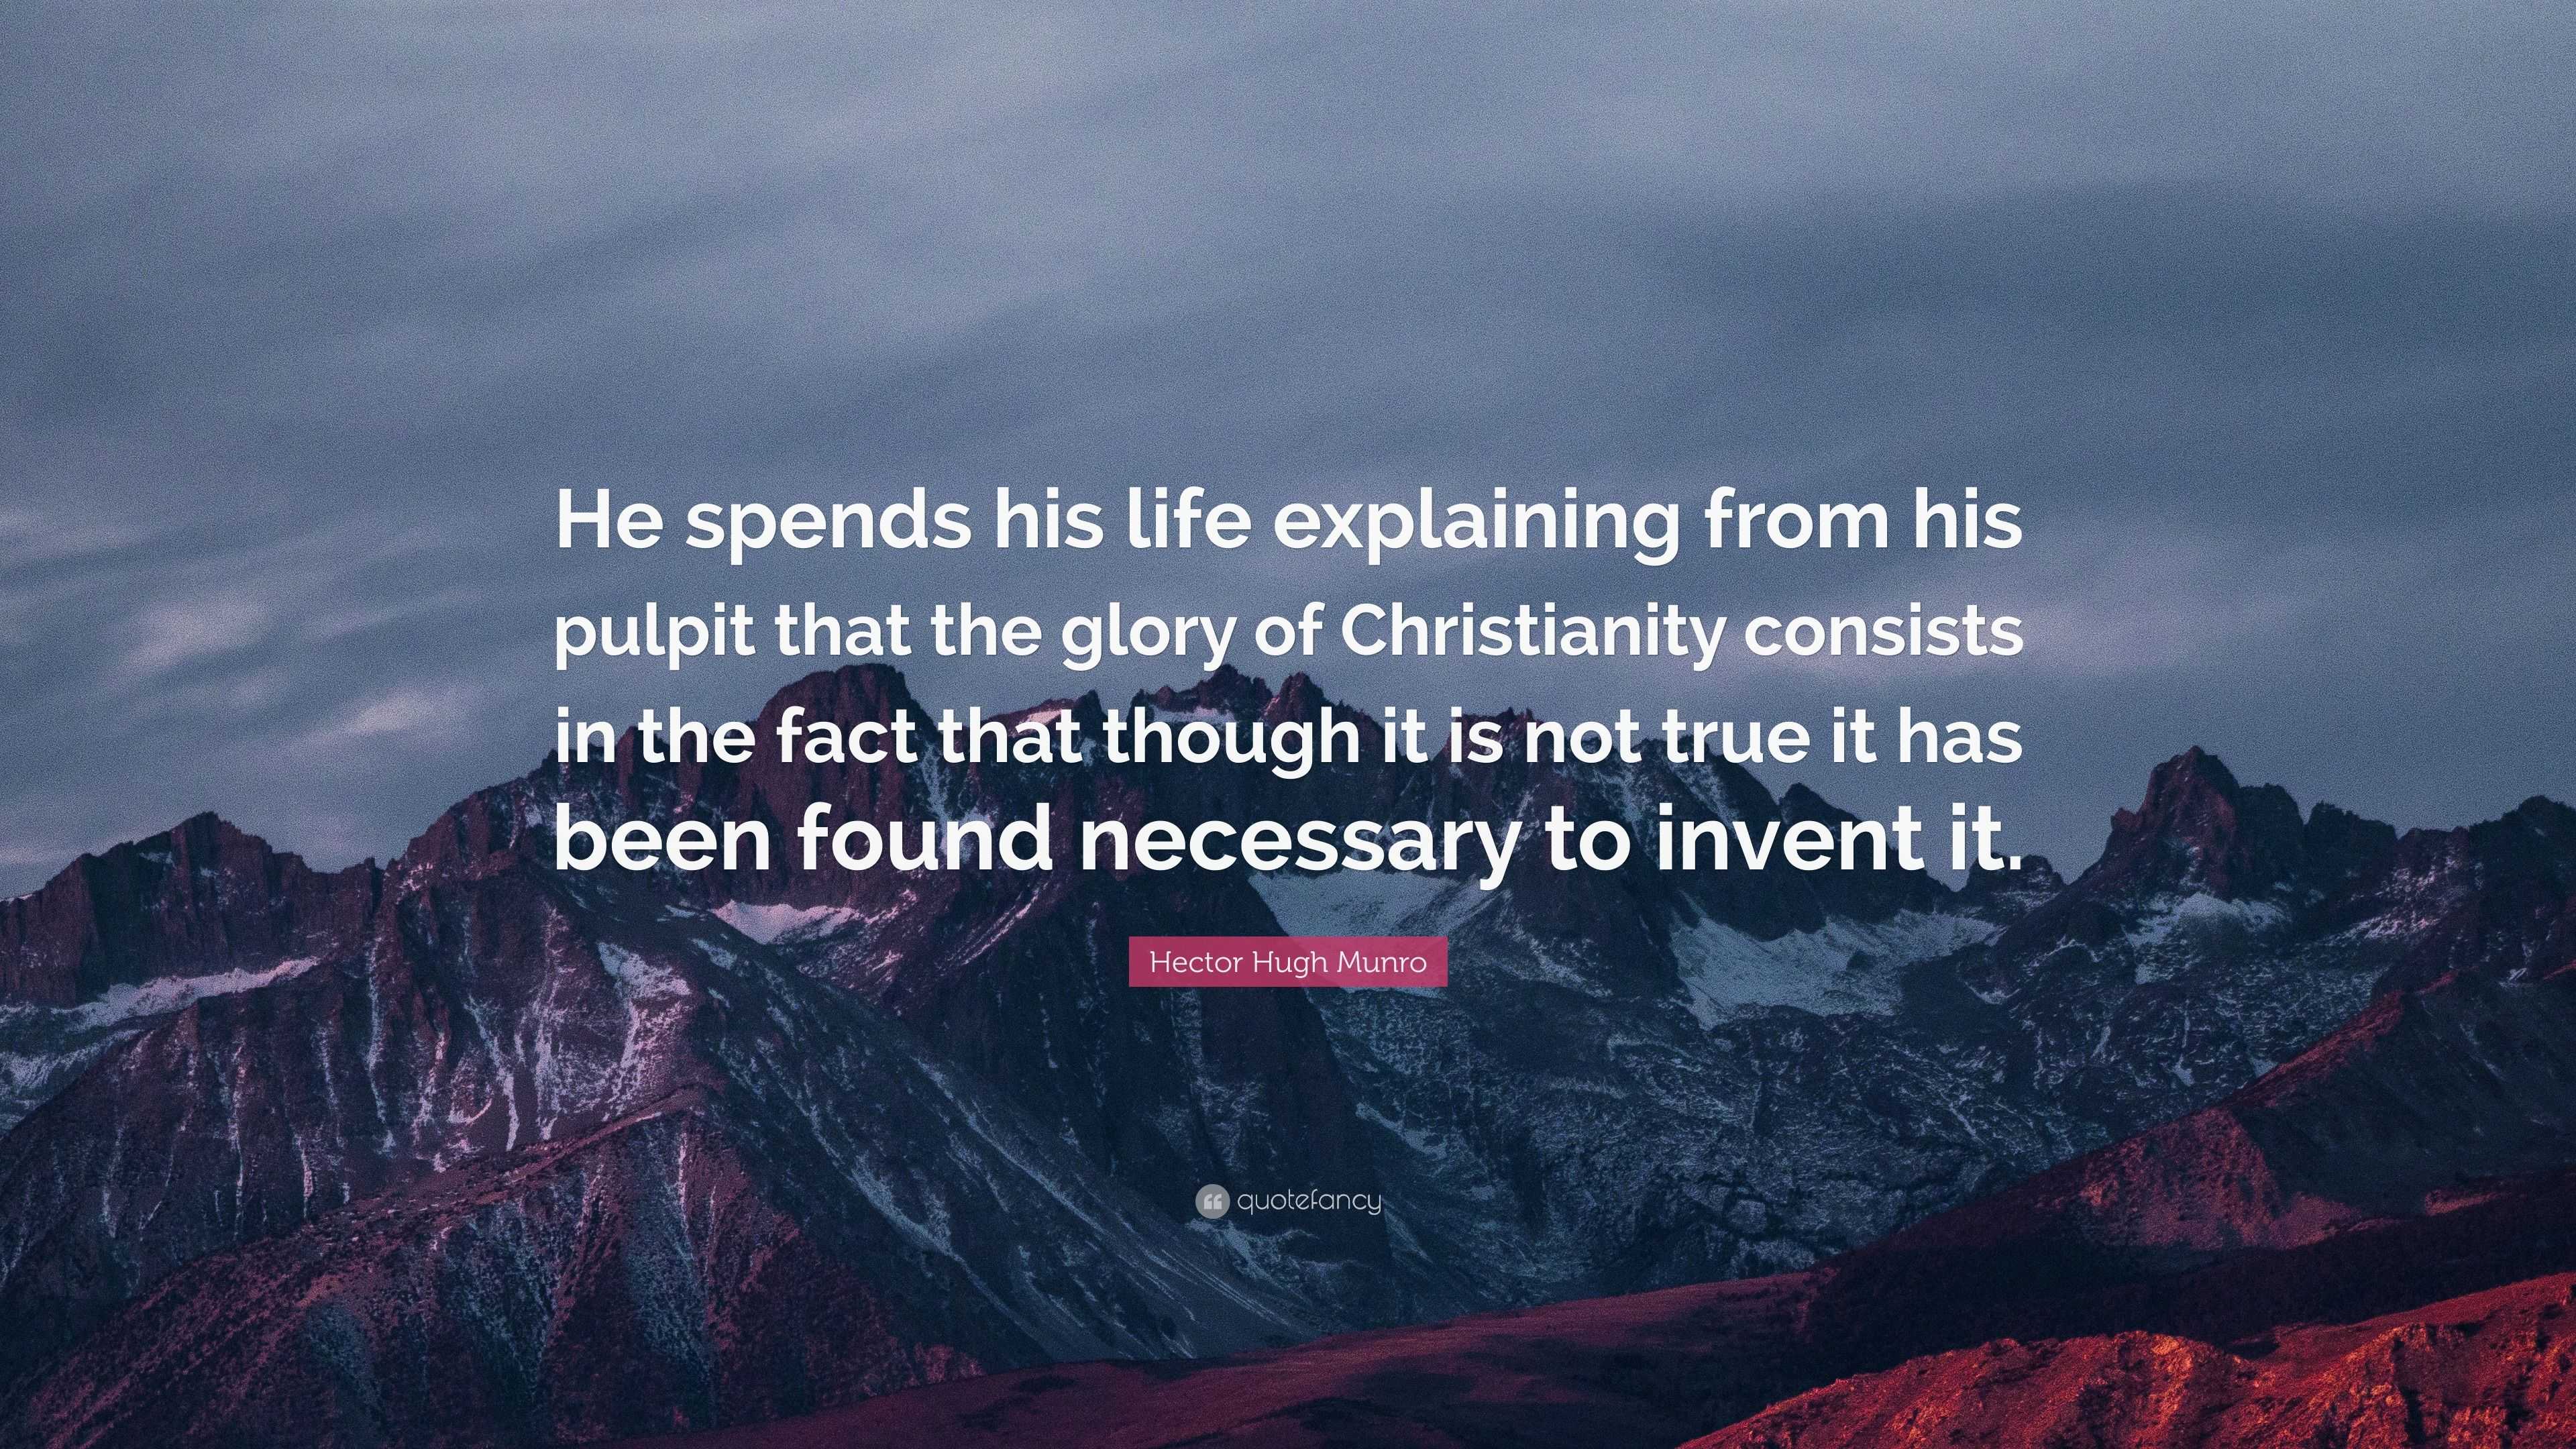 Hector Hugh Munro Quote: “He spends his life explaining from his pulpit ...